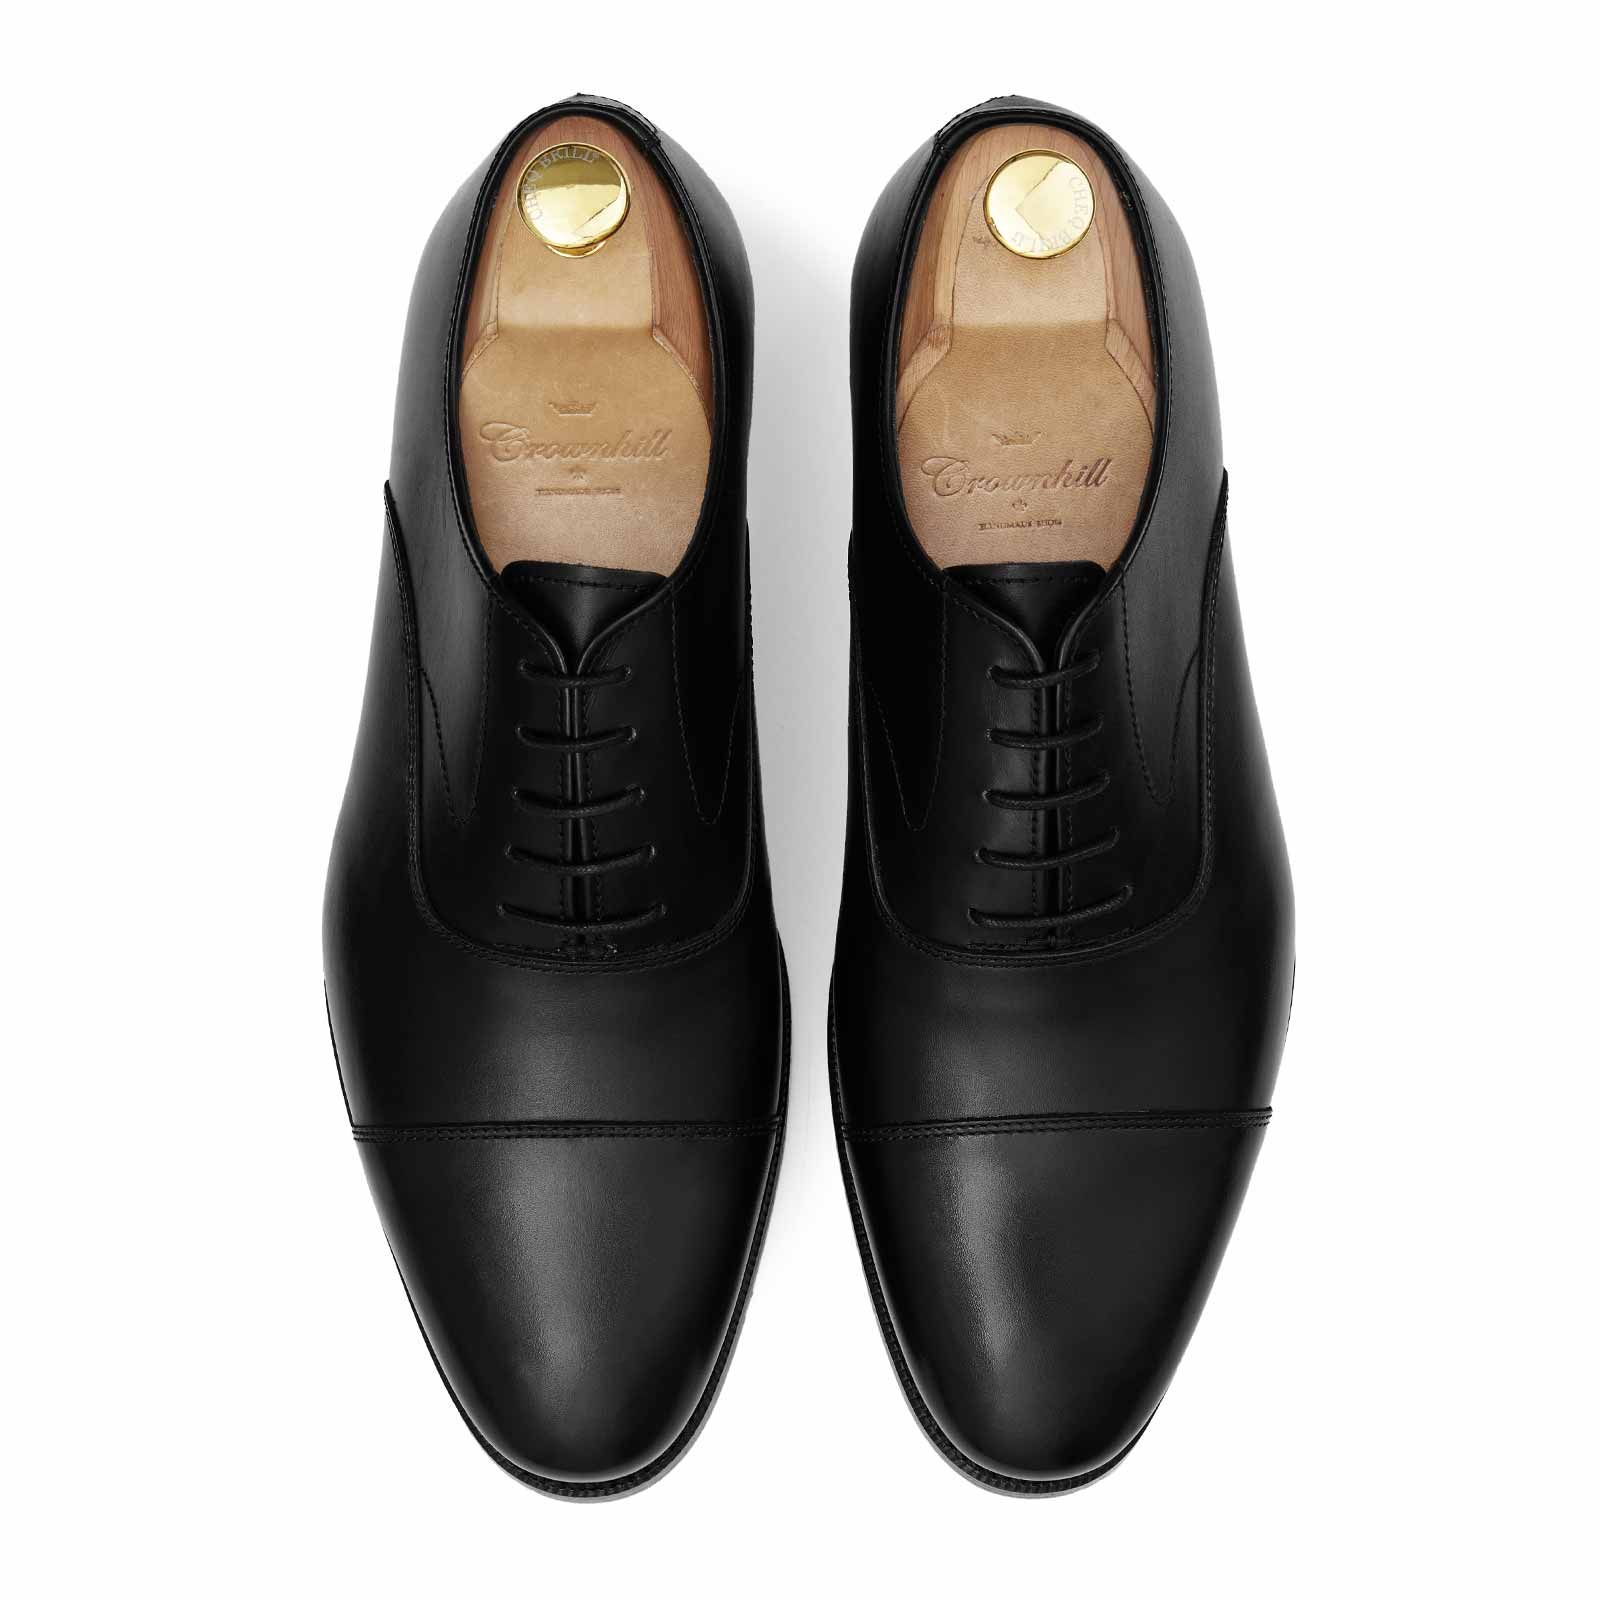 The Bogart: Zapato Negro Crownhill Shoes